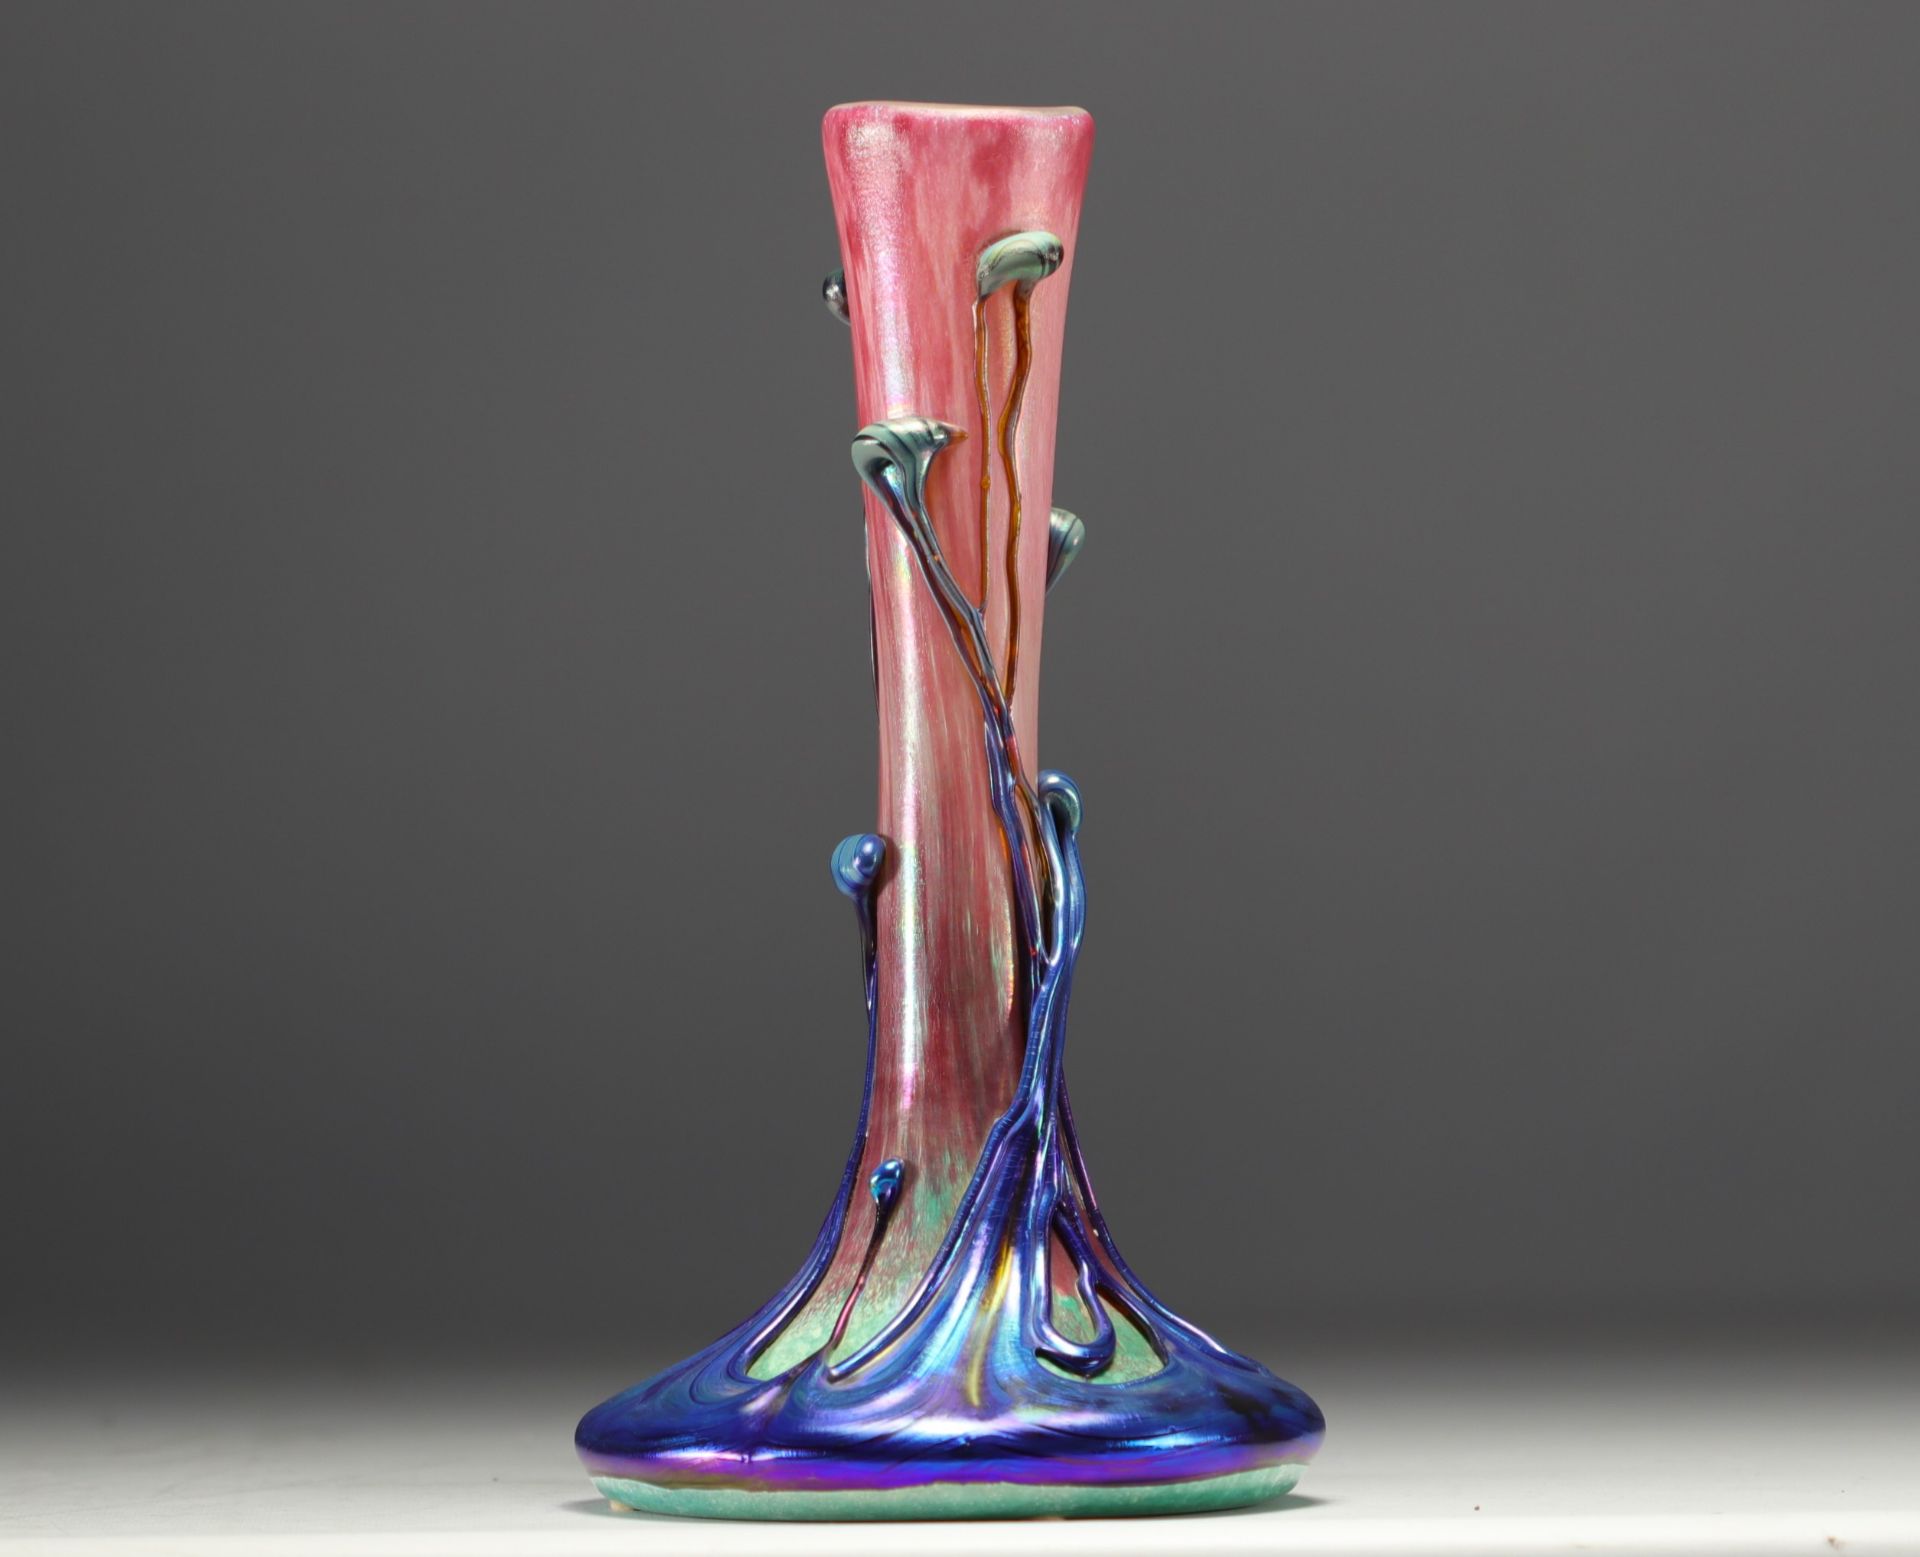 Michele LUZORO (1949 - ) Novaro workshop - Blown glass vase in shades of pink, blue and green. - Image 3 of 4